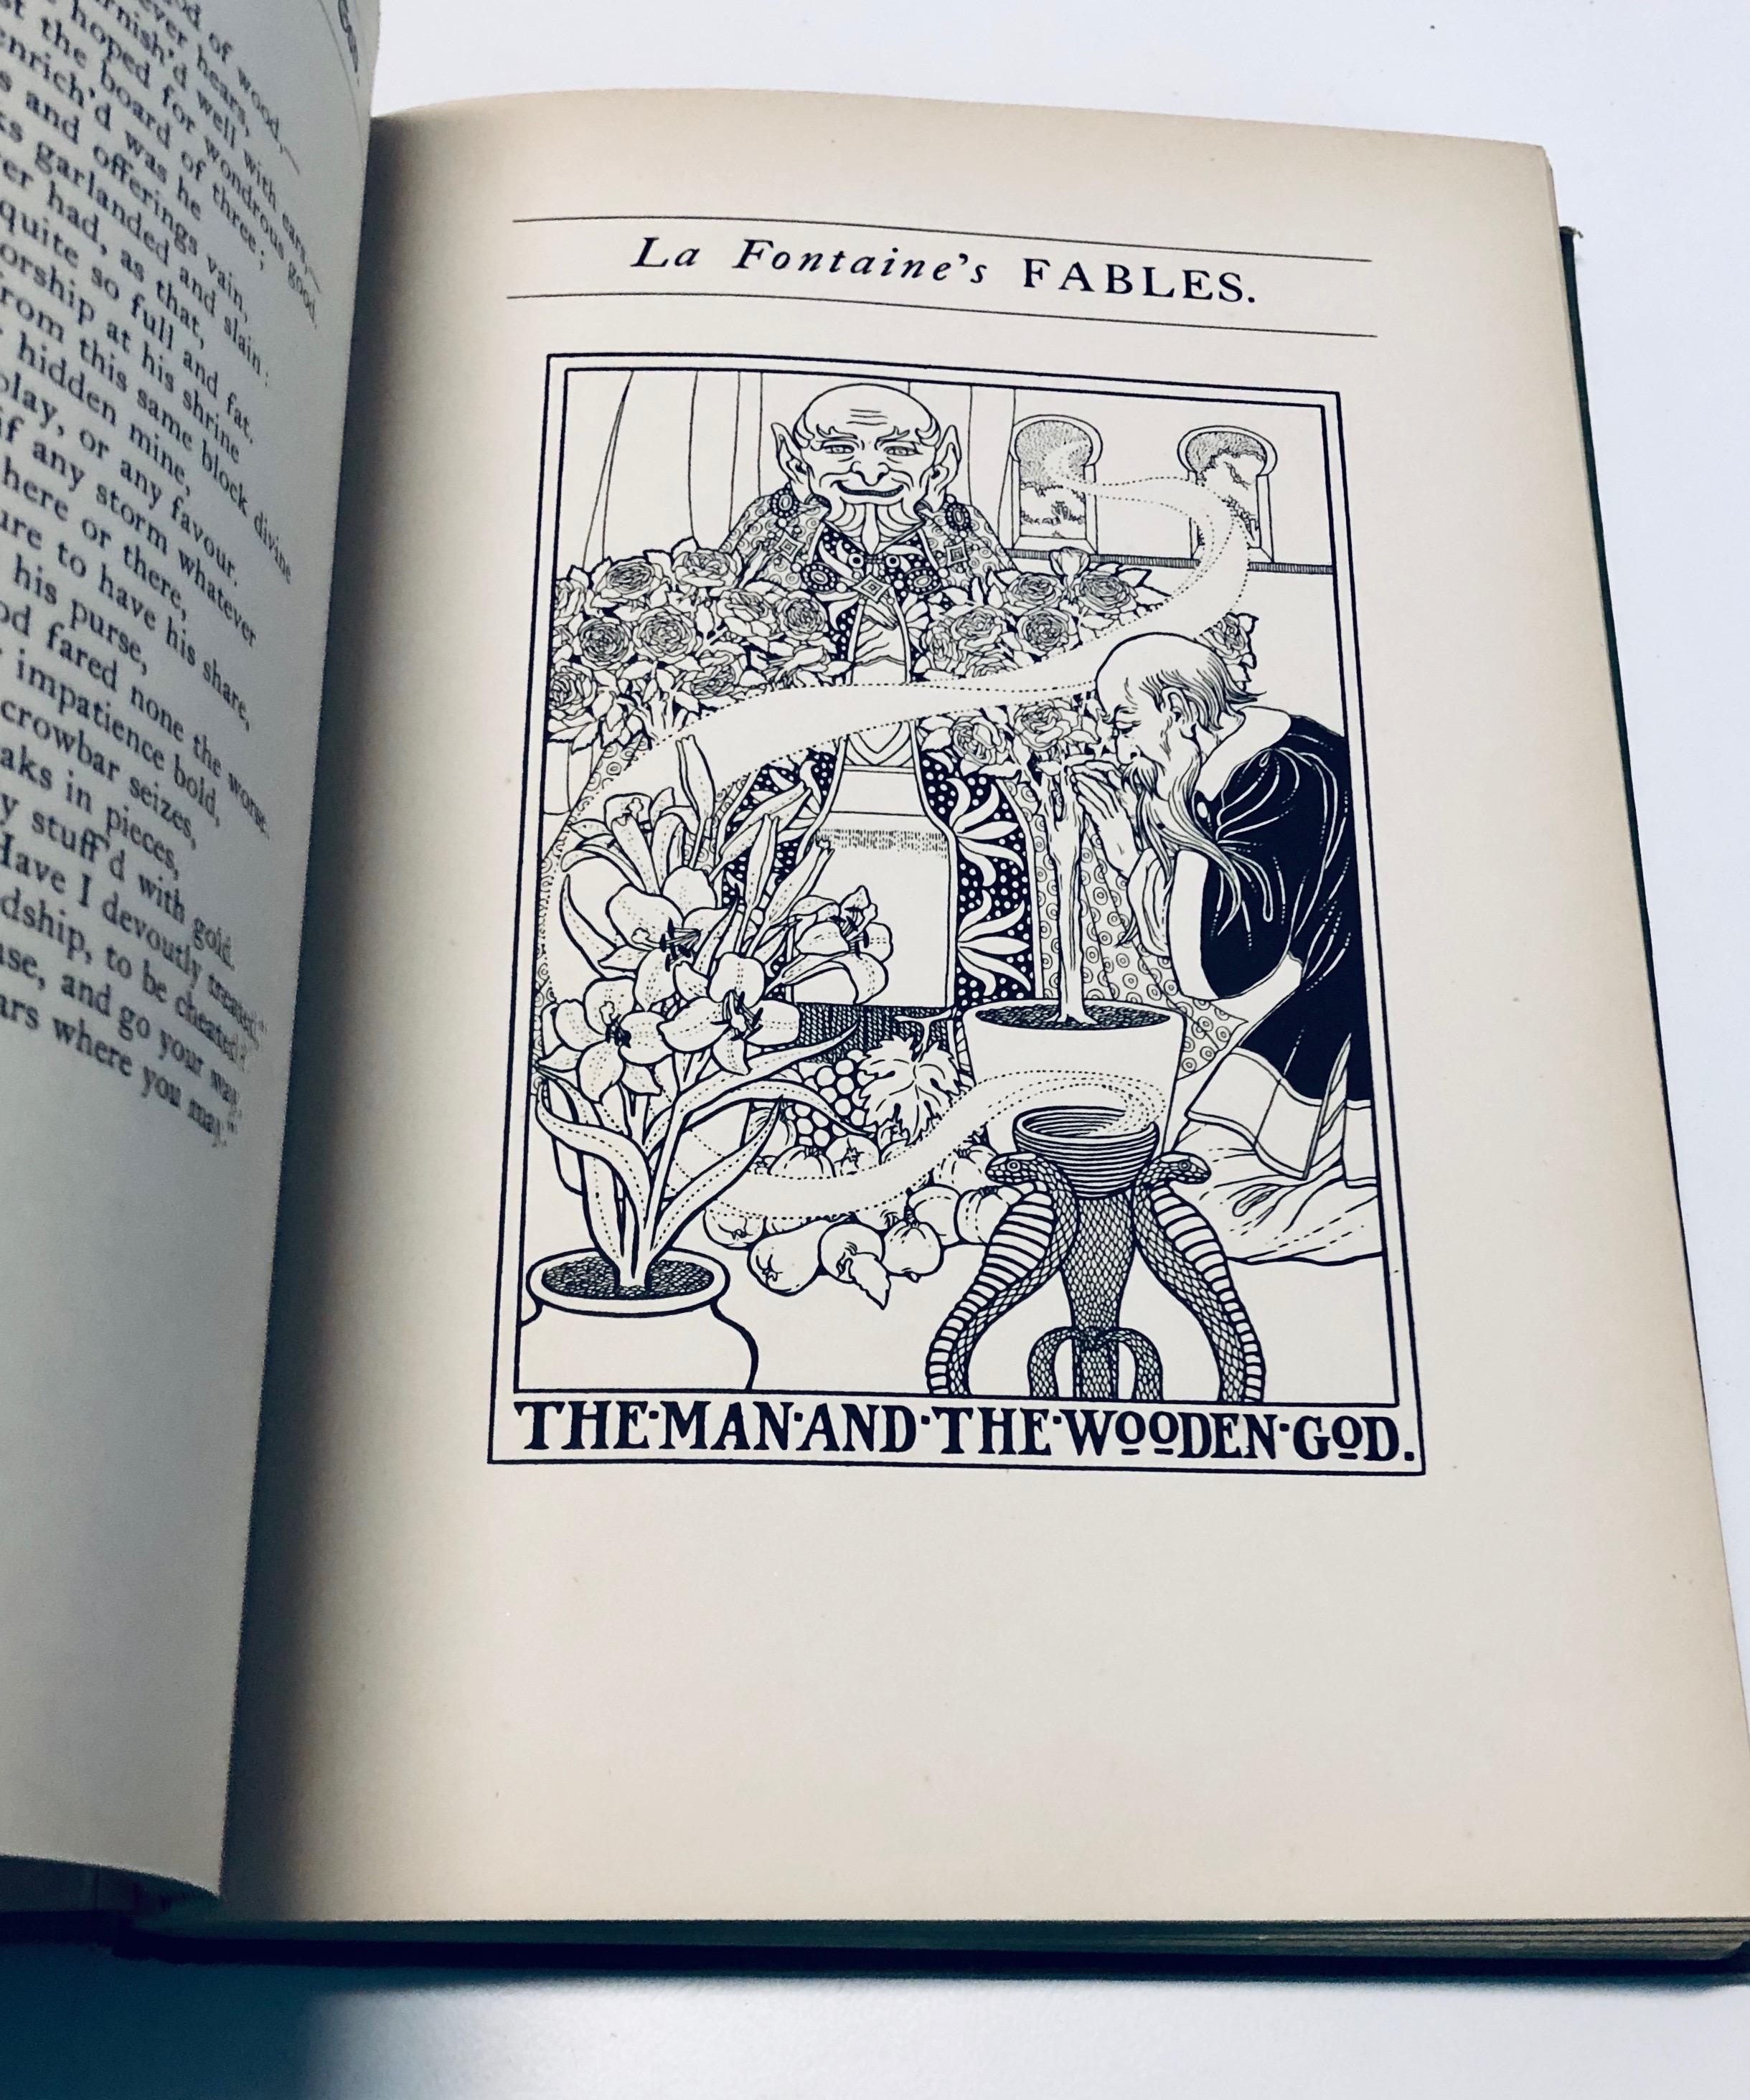 RARE A Hundred Fables of La Fontaine (1900) Illustrations by Percy J. Billinghurst